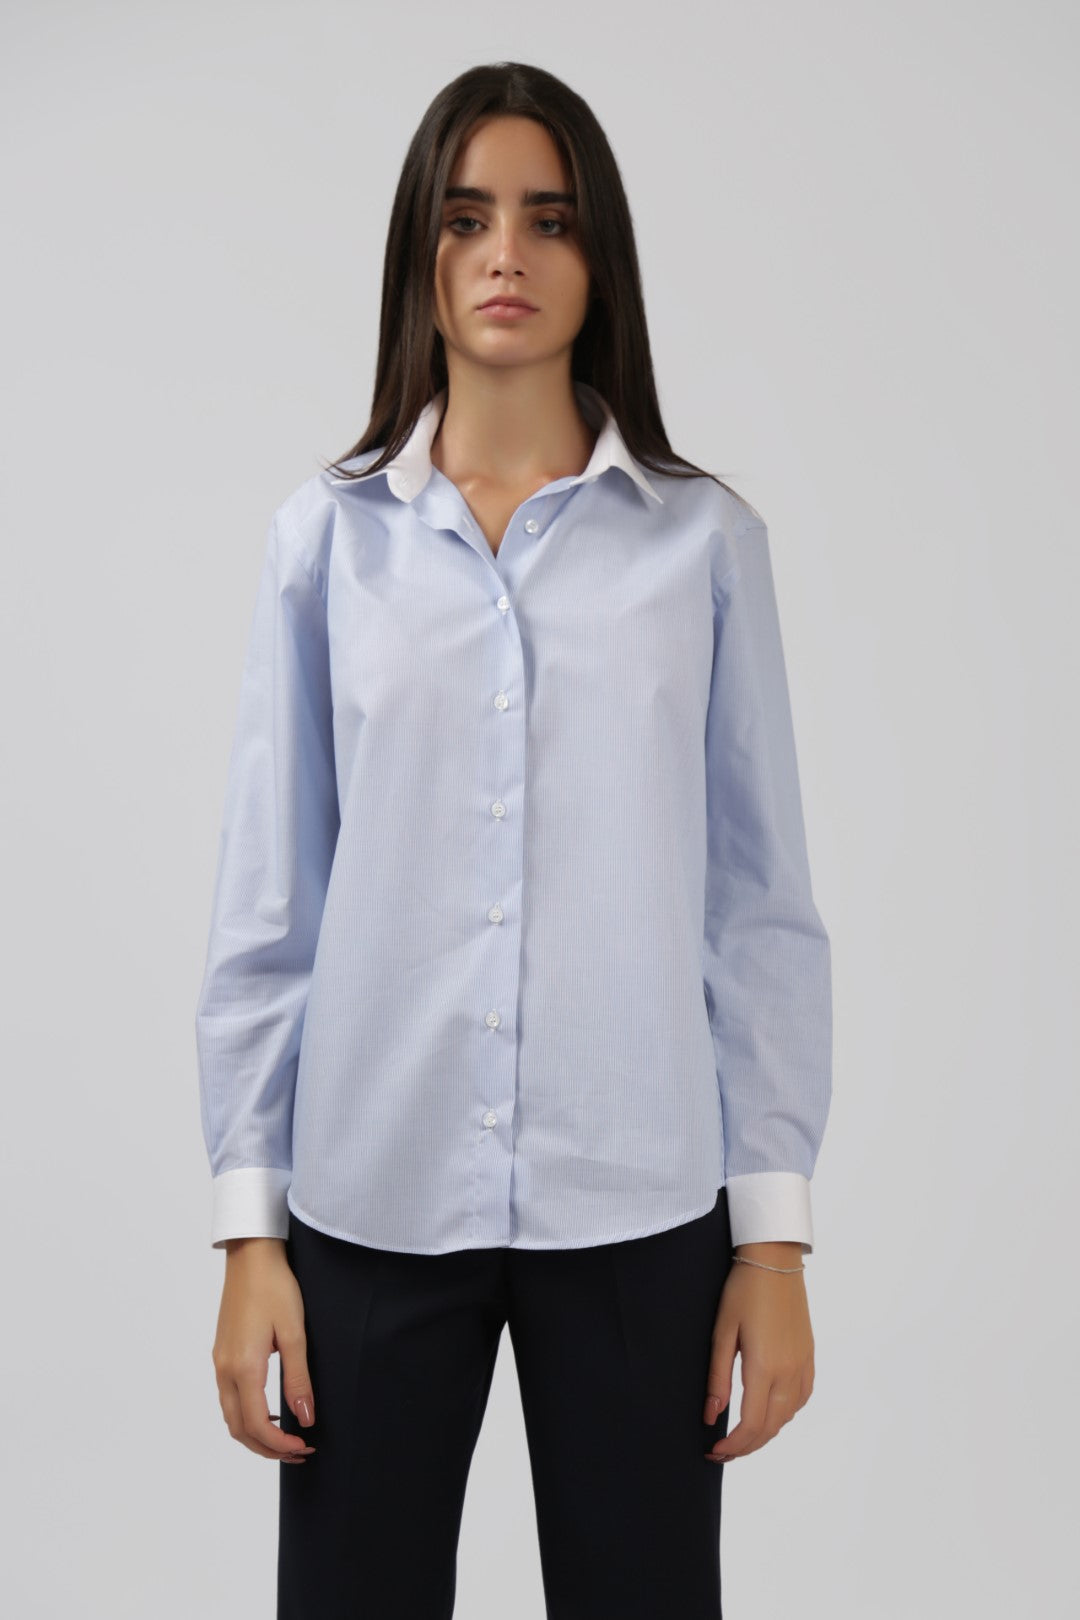 Light Blue Button Up Shirt with White Collar